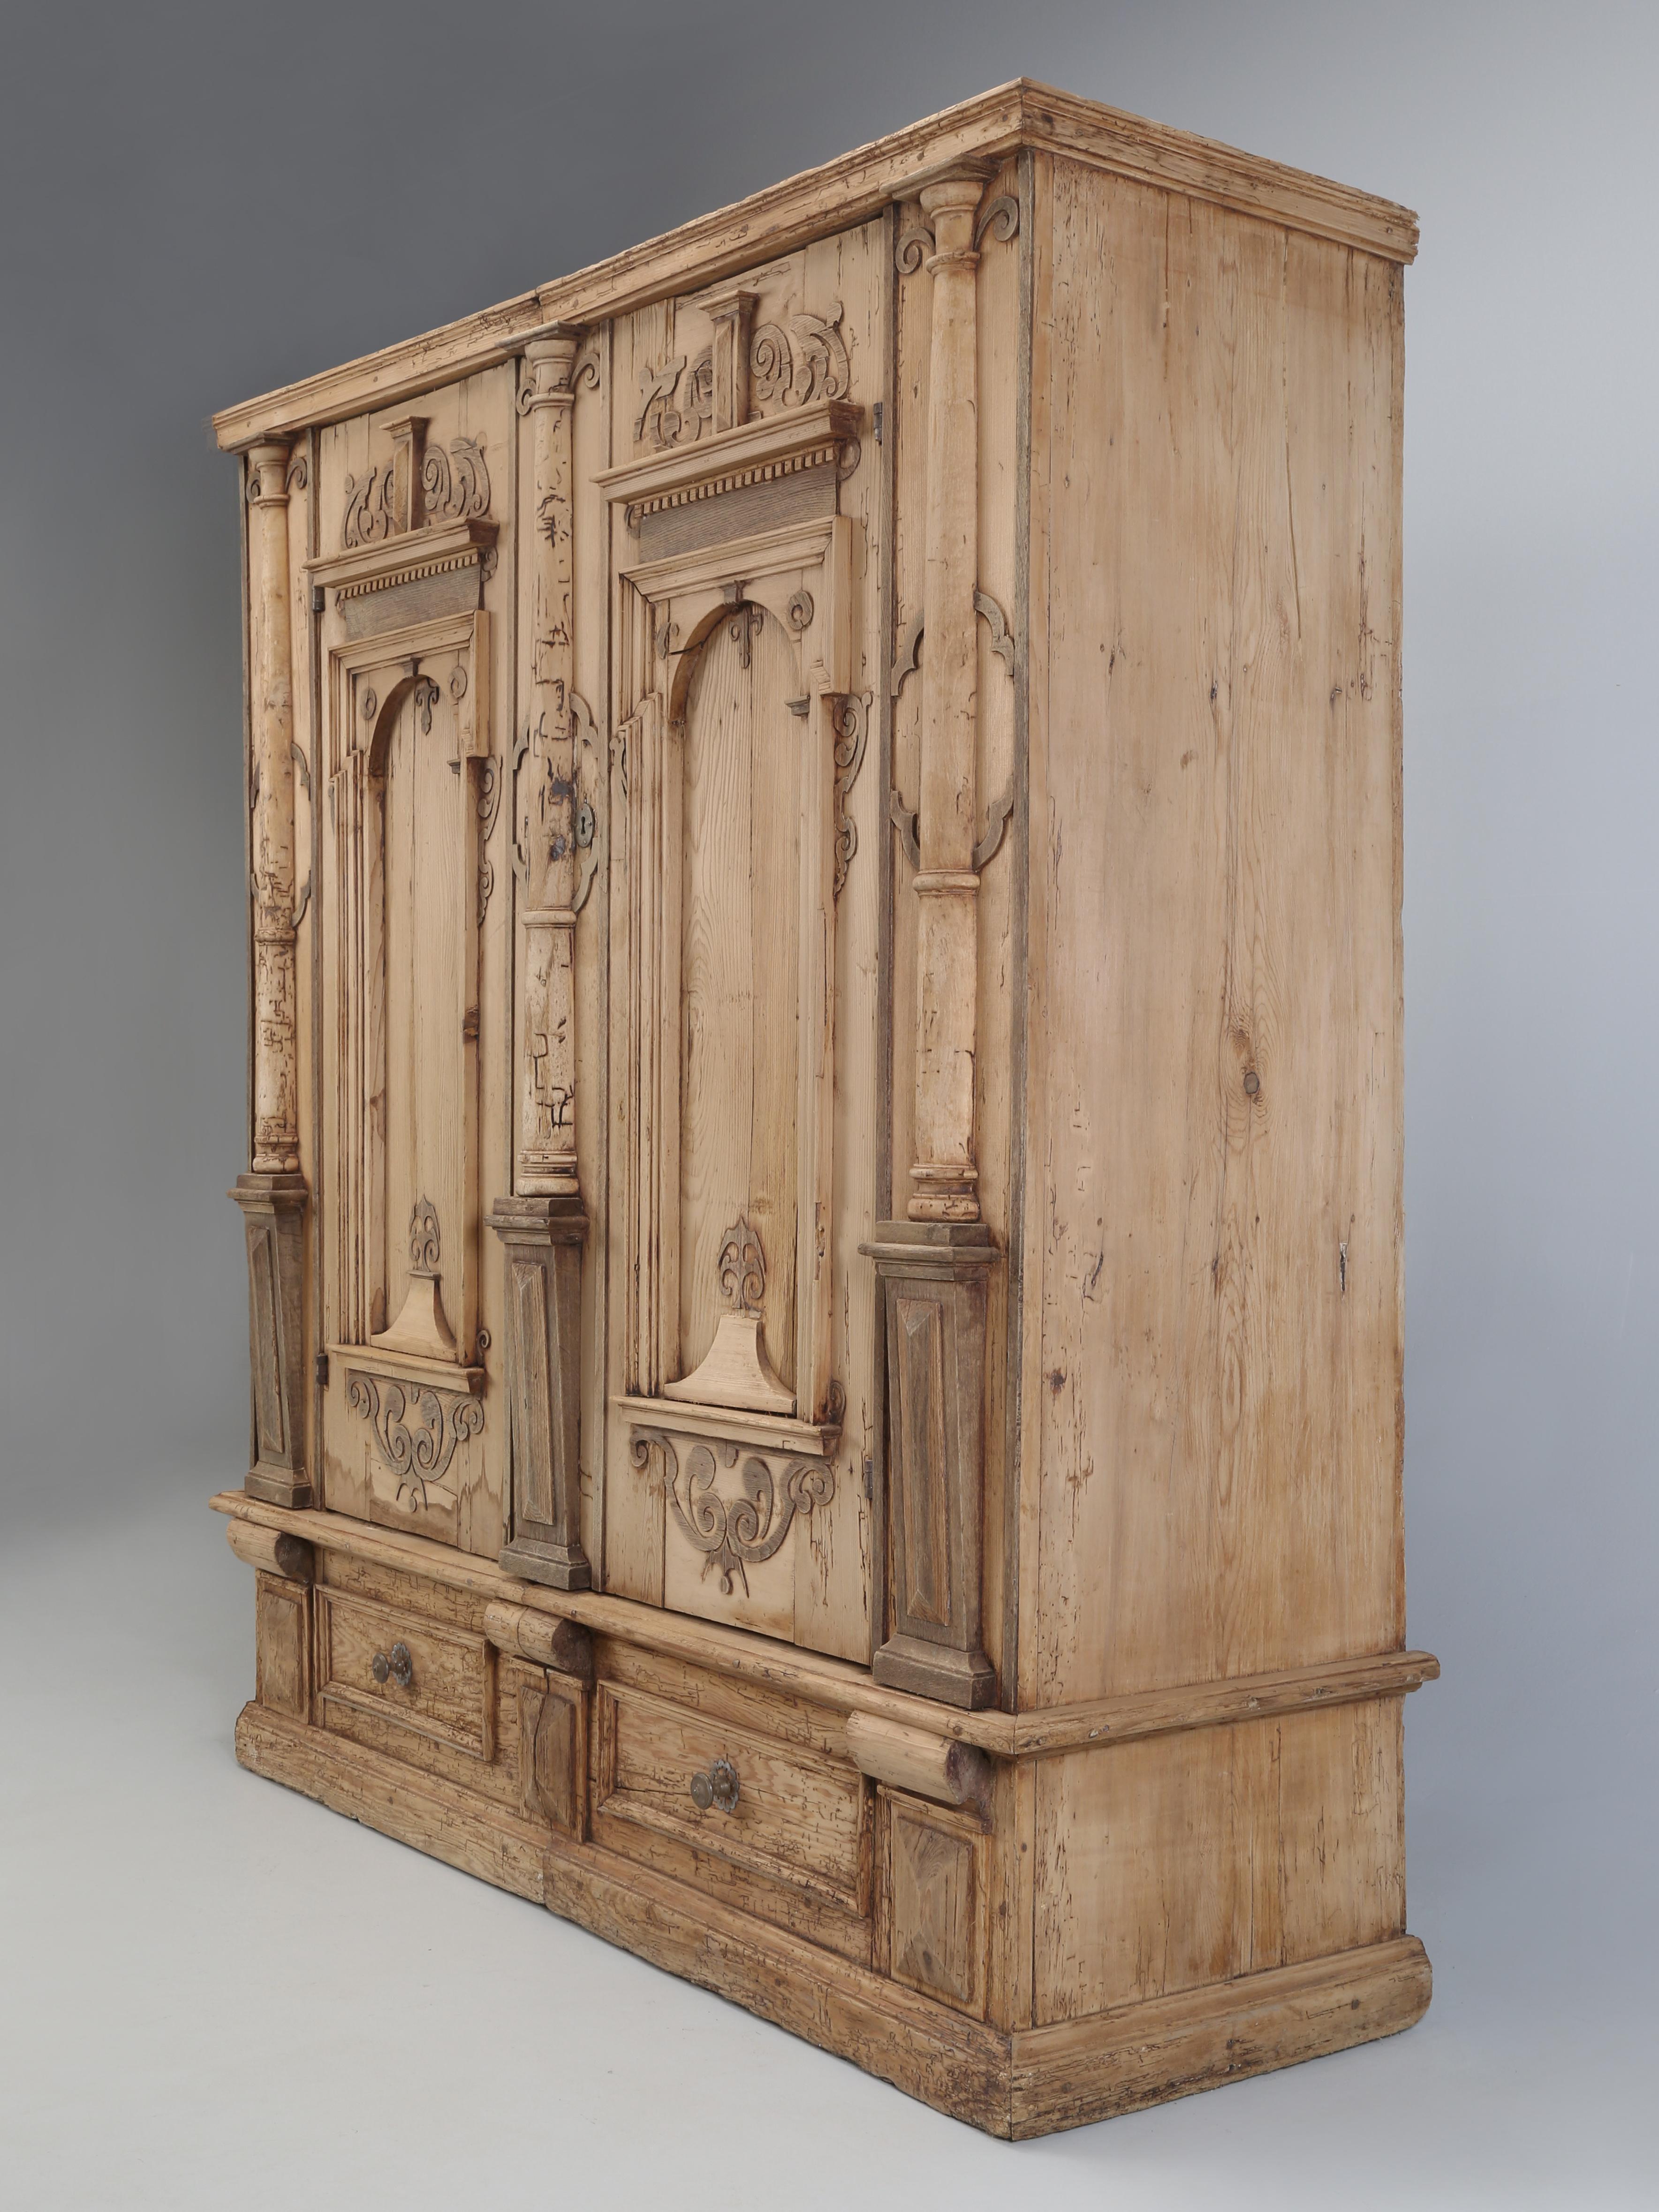 Antique German Baroque Armoire or Cabinet with two doors built in the mid-1700’s, based on the hardware and construction. The Antique Armoire is made from Stripped Pine and has numerous interesting details and we were slightly tempted to apply an